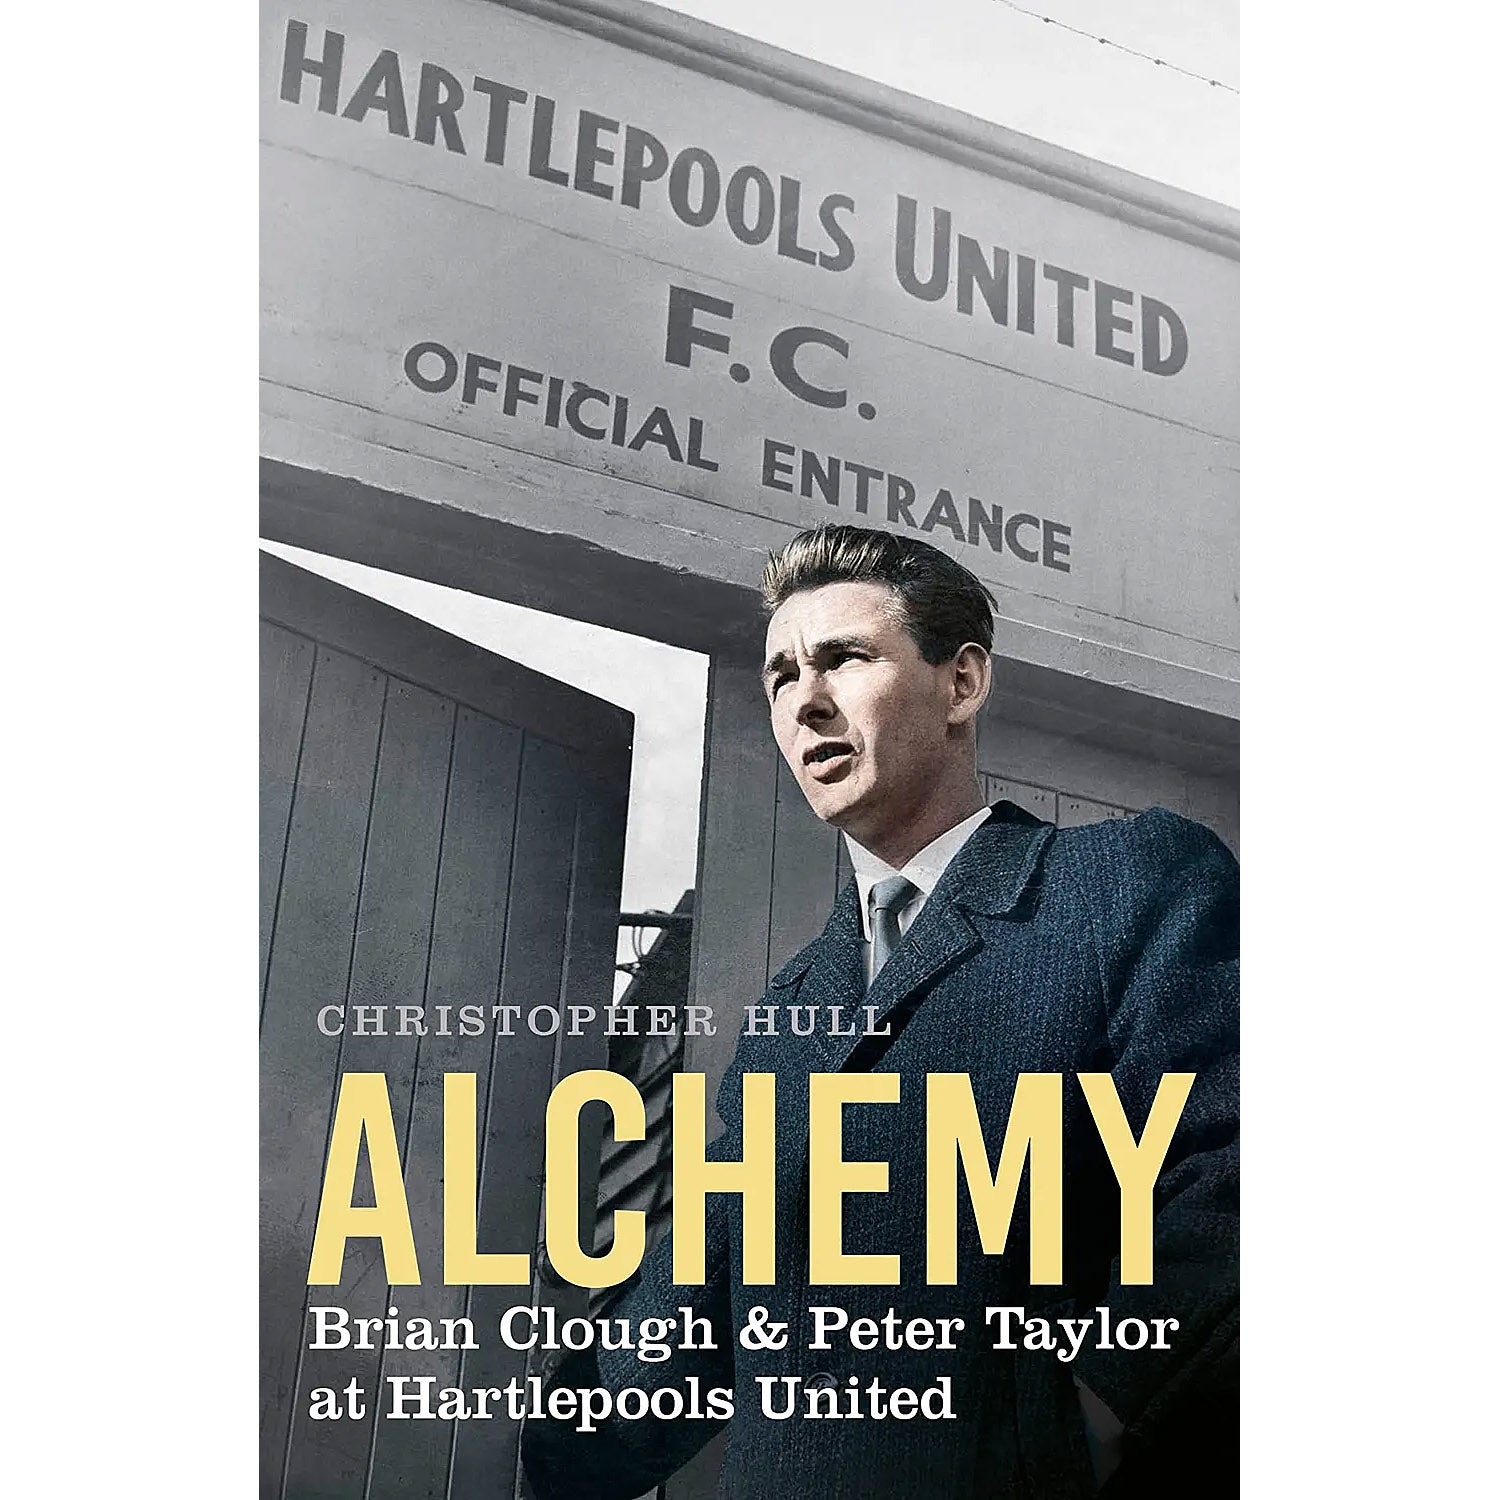 Alchemy – Brian Clough & Peter Taylor at Hartlepools United